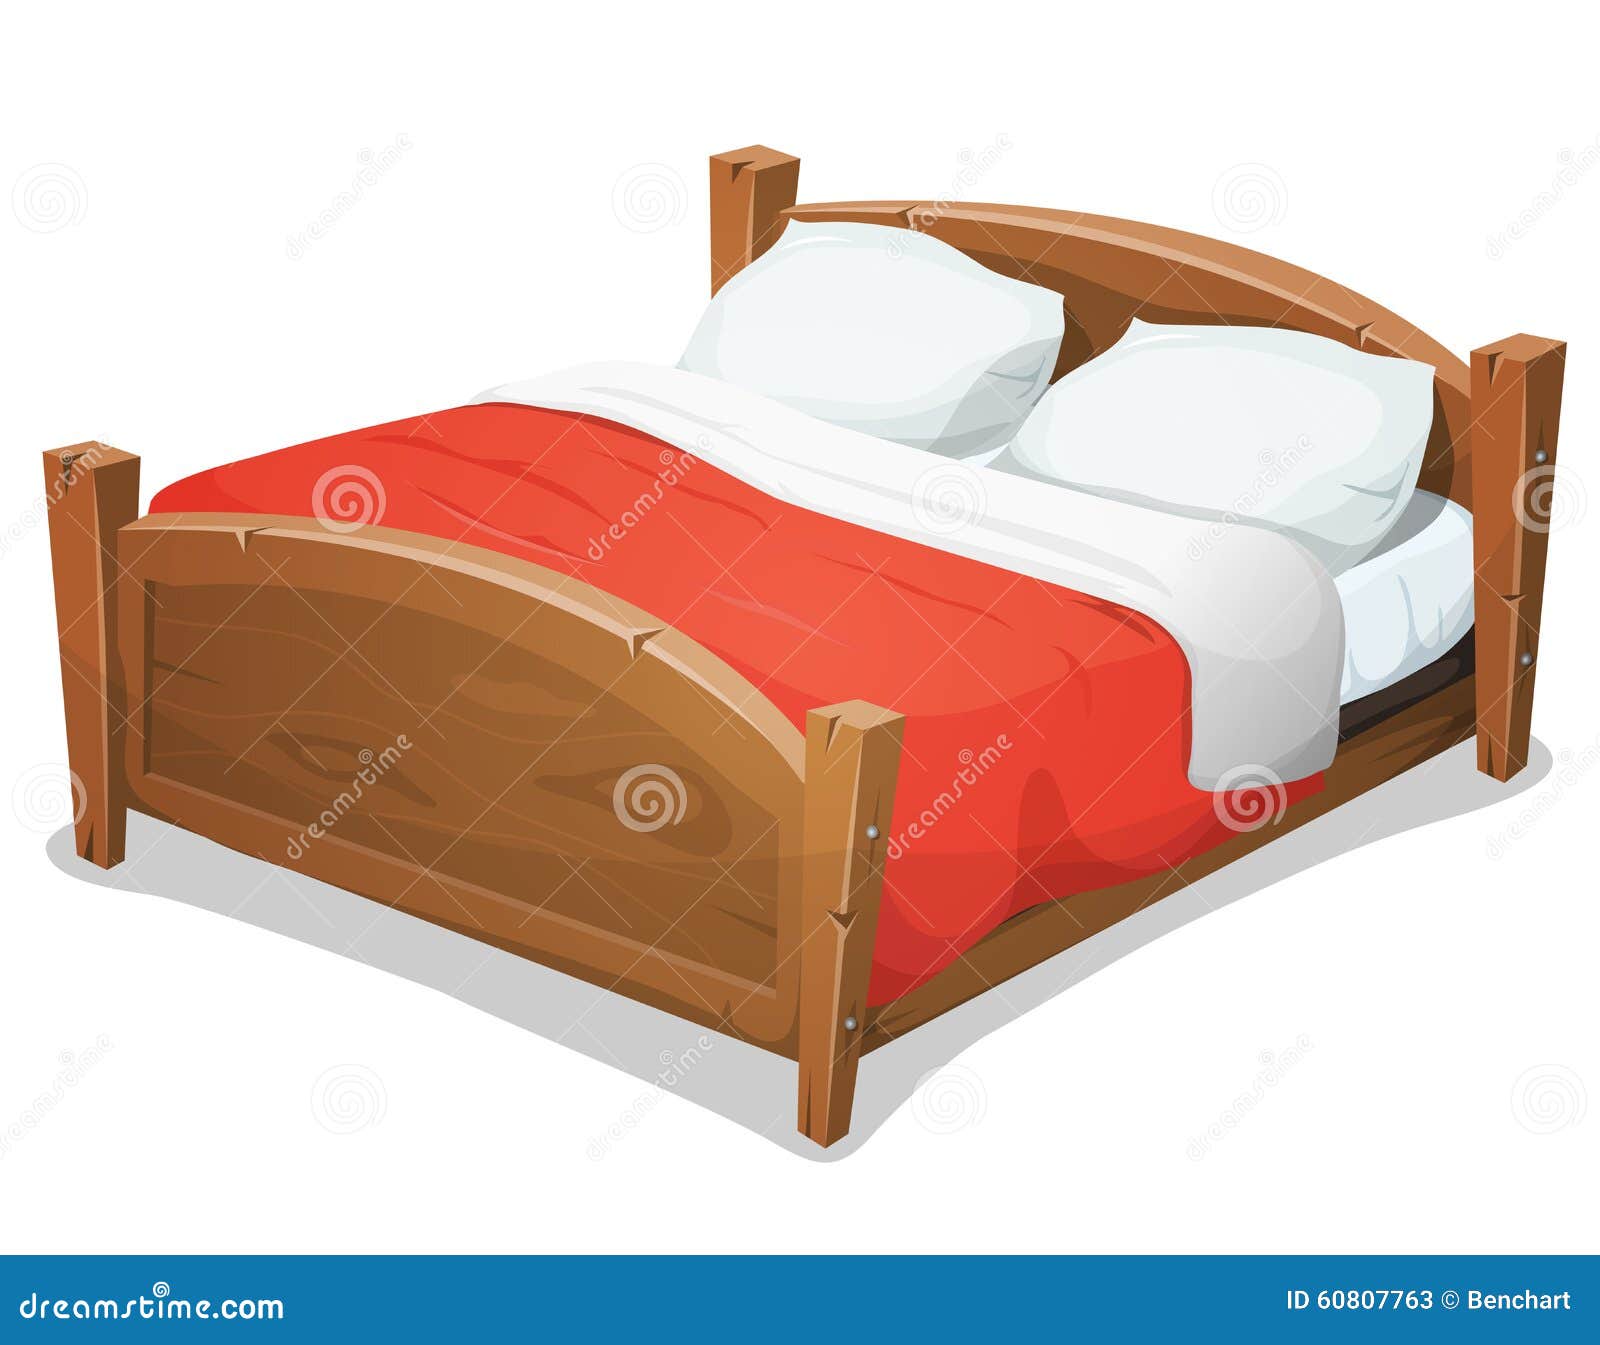 wood-double-bed-red-blanket-illustration-cartoon-wooden-big-couples ...